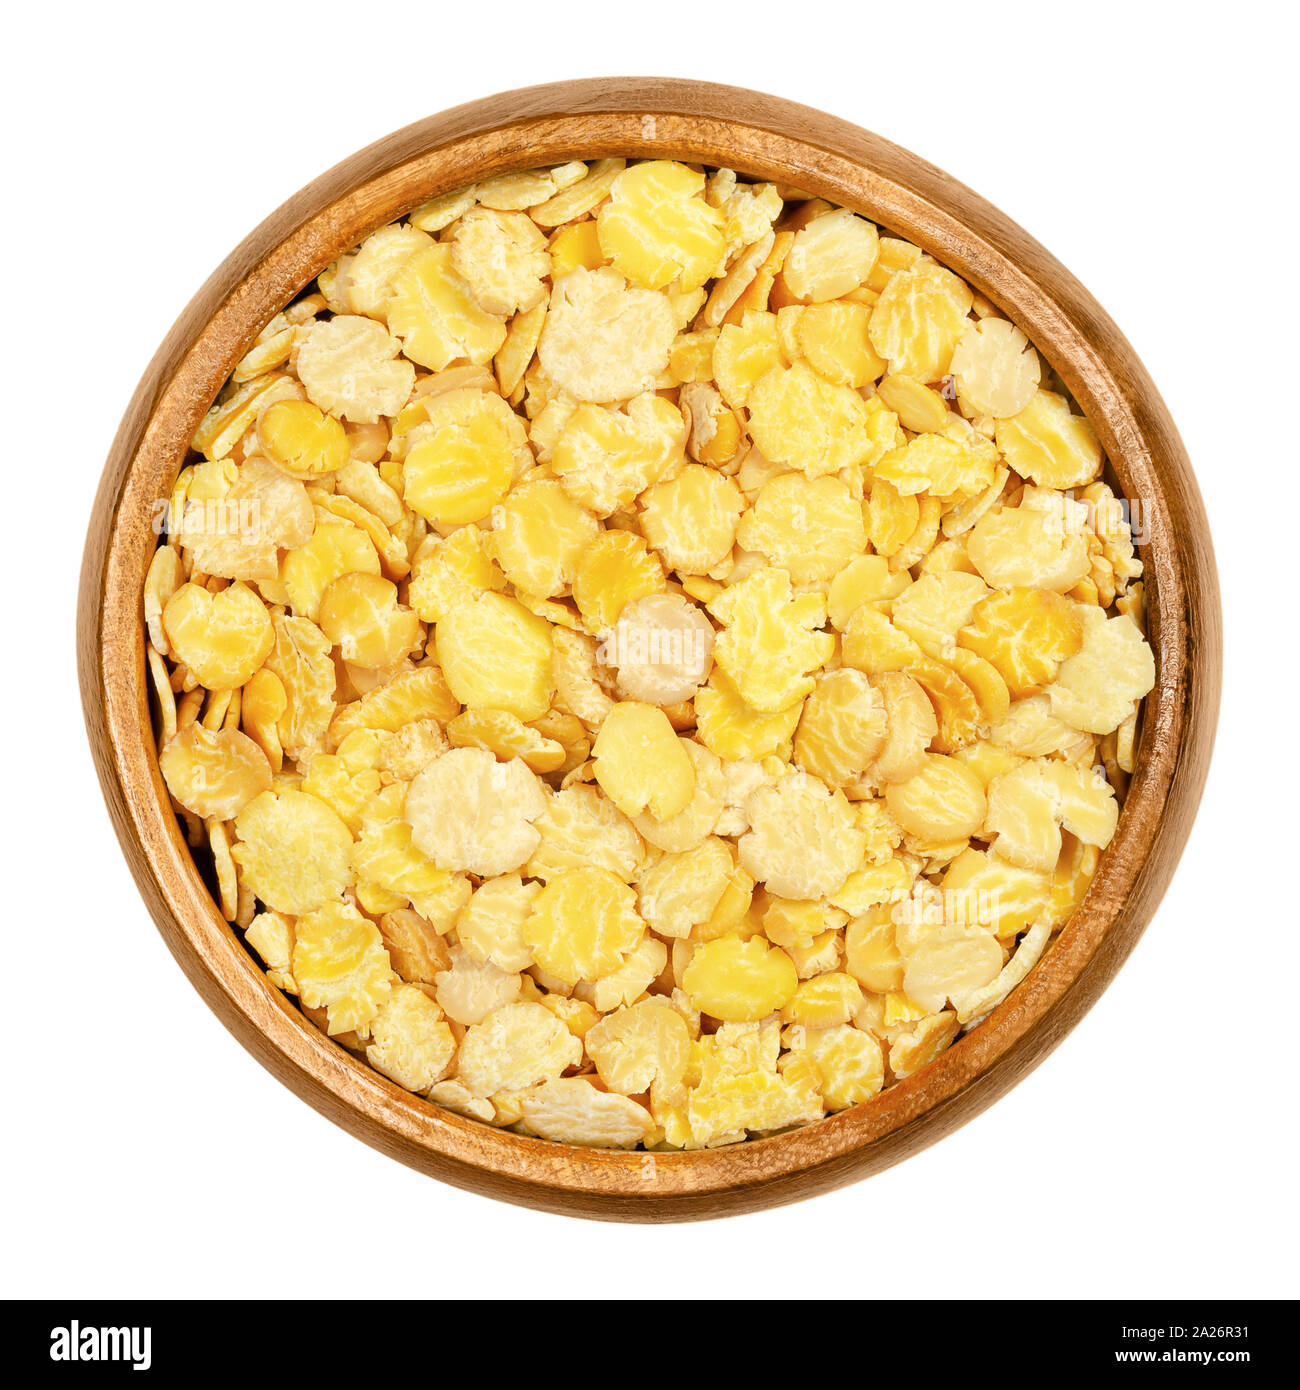 Soya flakes in wooden bowl. Defatted and toasted soybeans, rolled into flakes. Glycine max, also known as soya bean, a legume and oilseed. Stock Photo